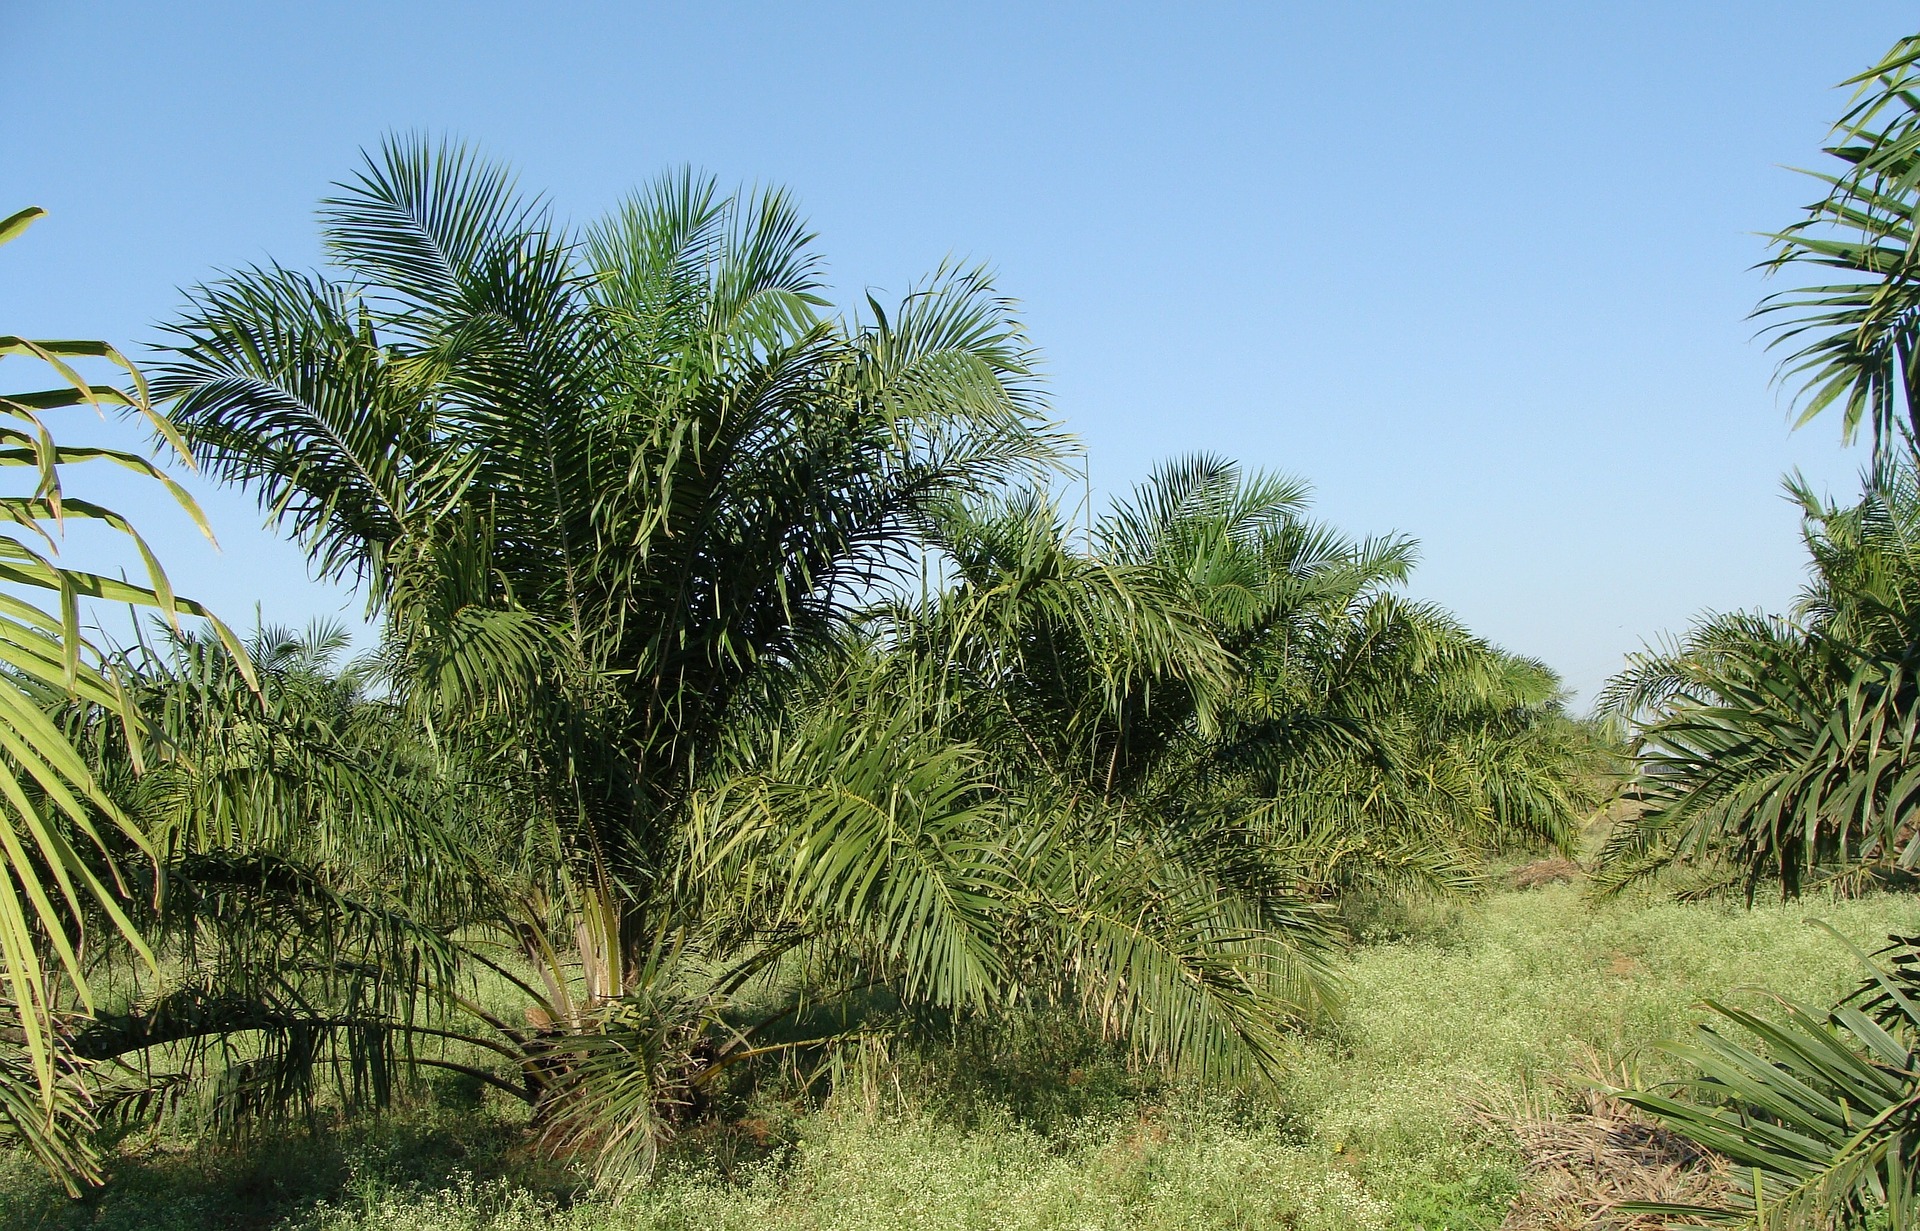 Expanding land under oil palm apt, but not at the cost of environment